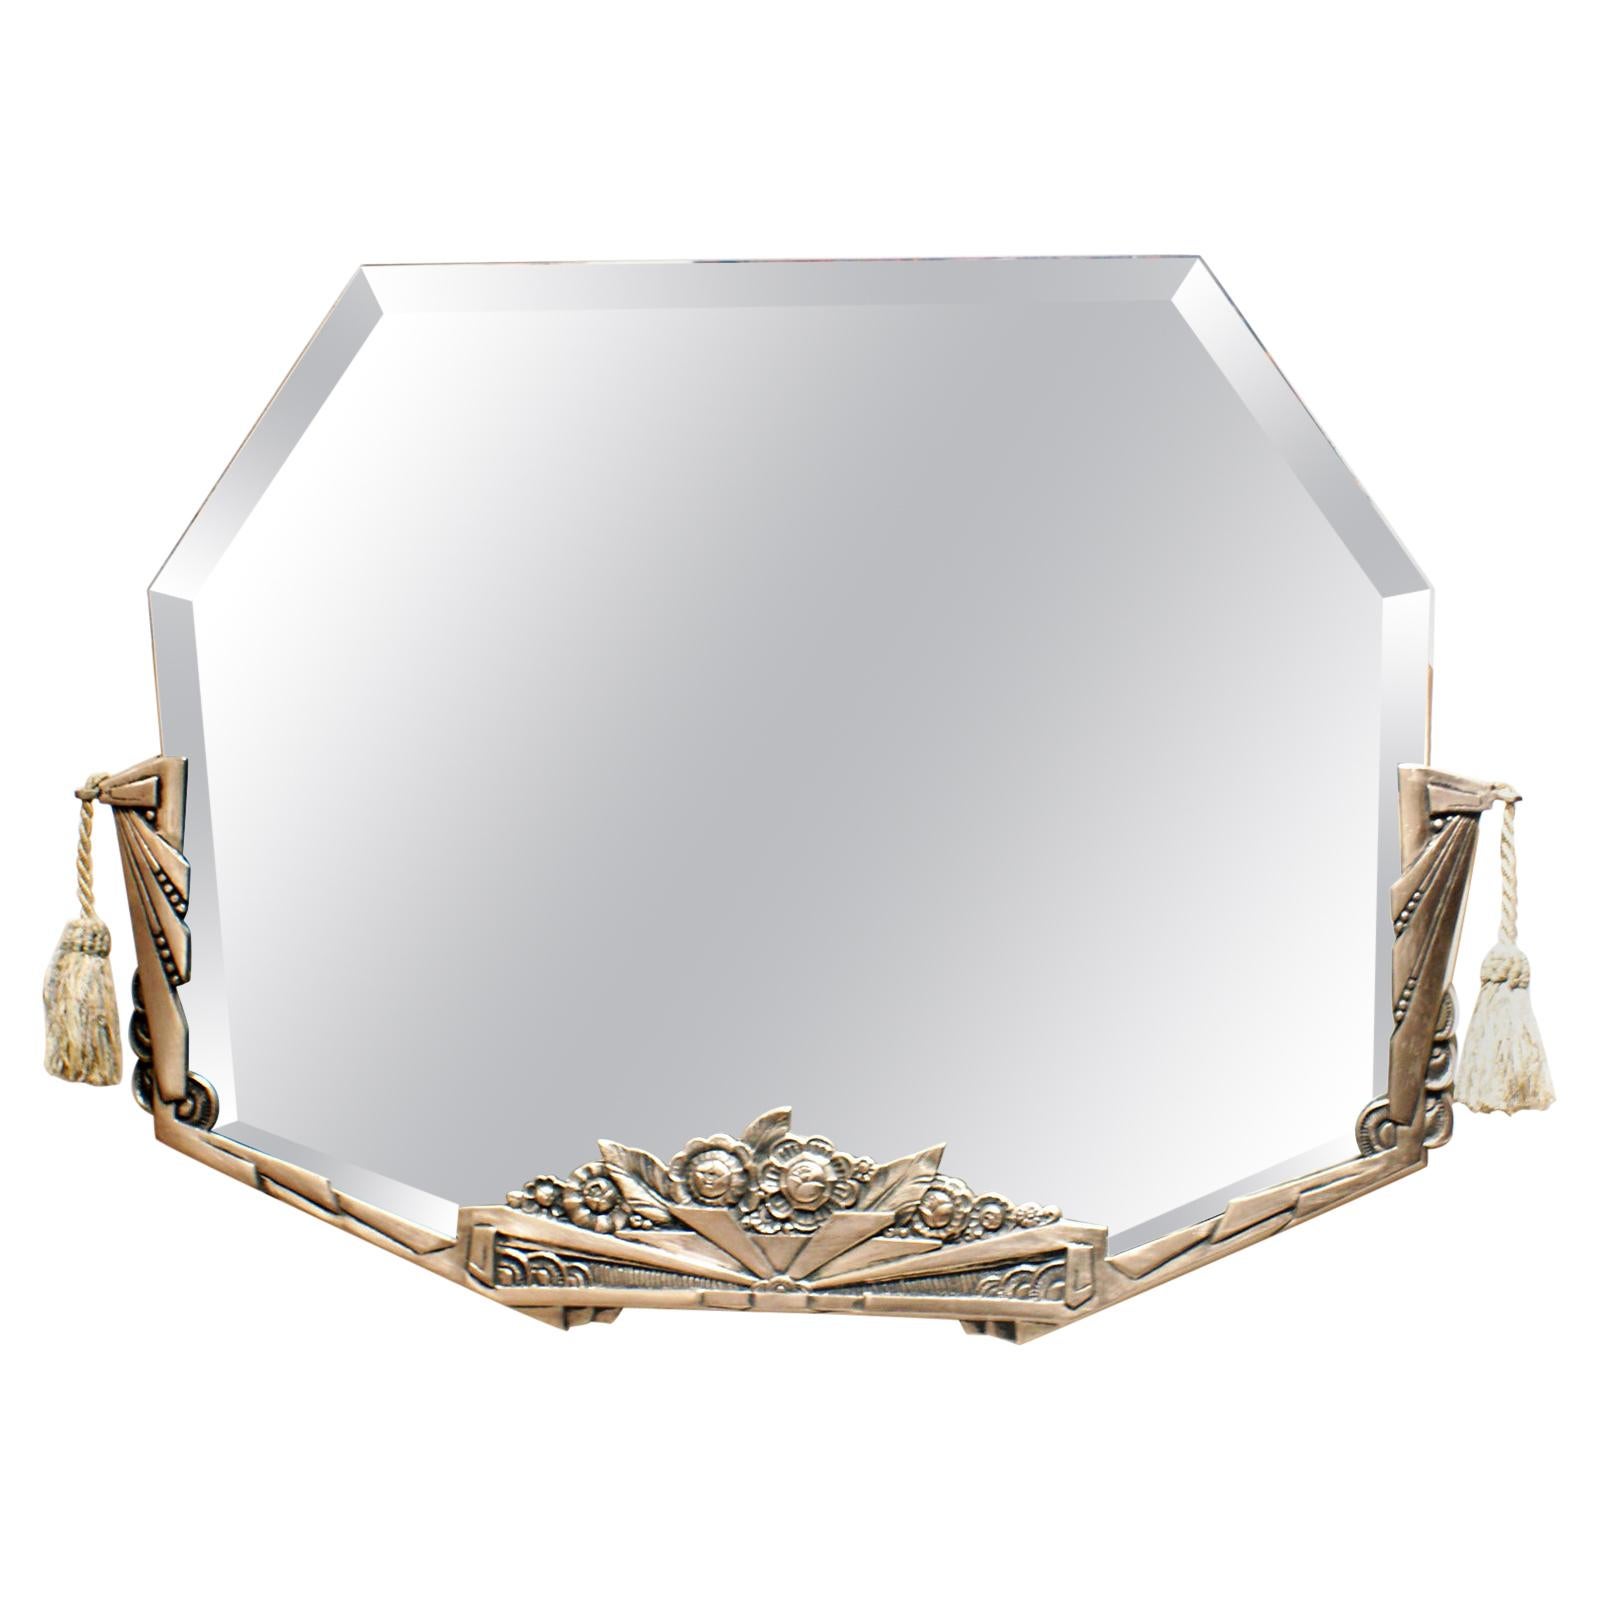 Original Art Deco Etched Nickel-Plated Wall Mirror For Sale